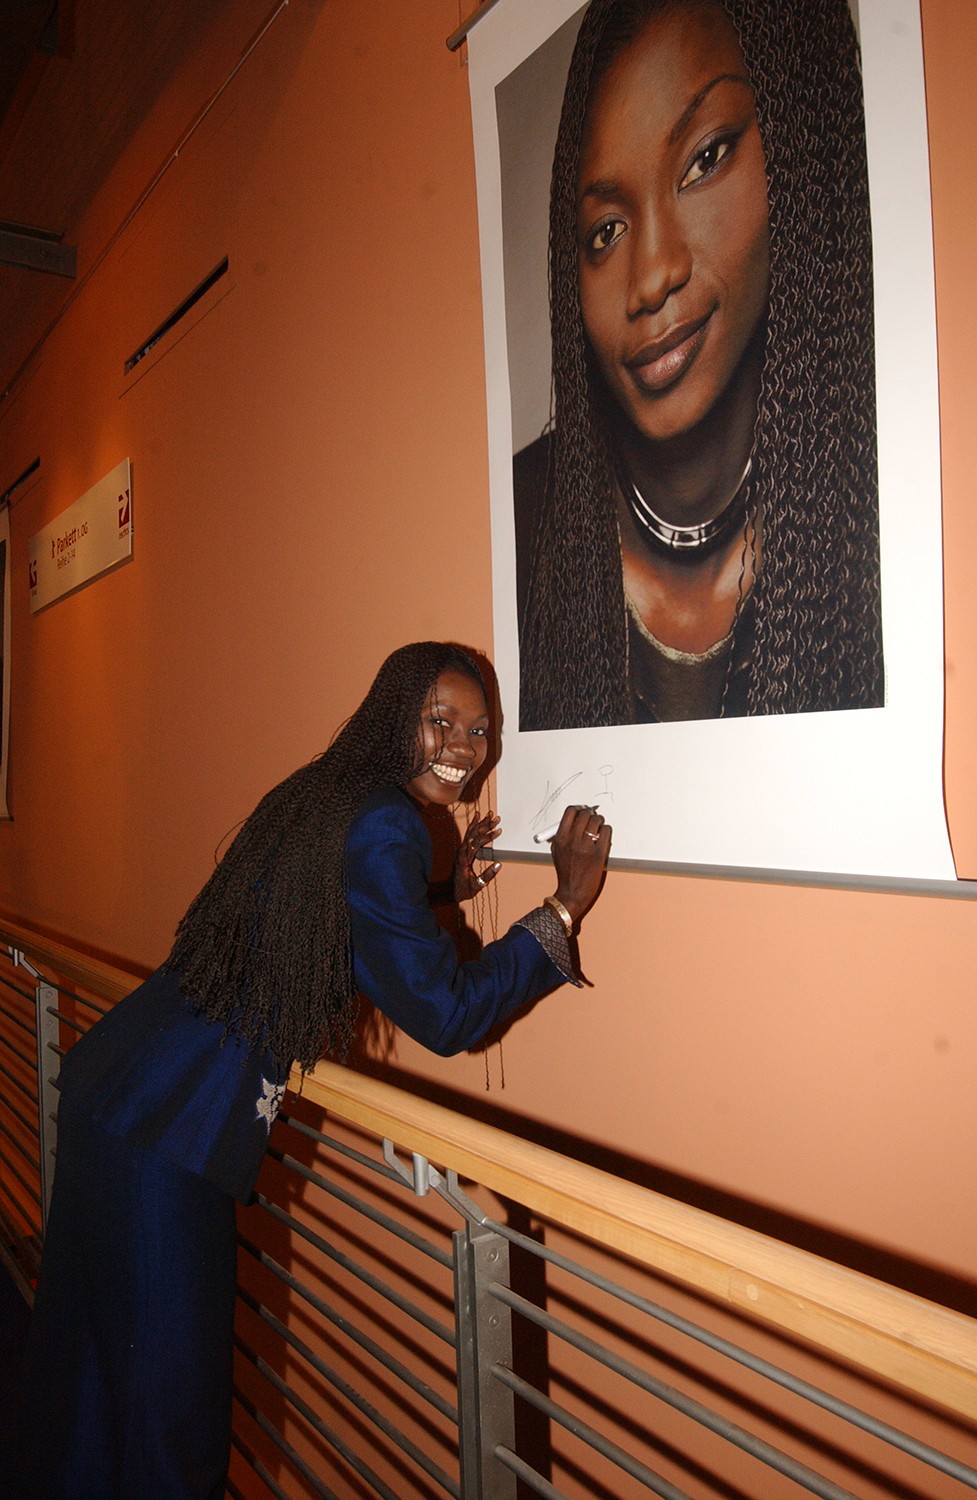 <p><i>Madame Brouette</i> leading actress Rokhaya Niang sign her photo </p>

